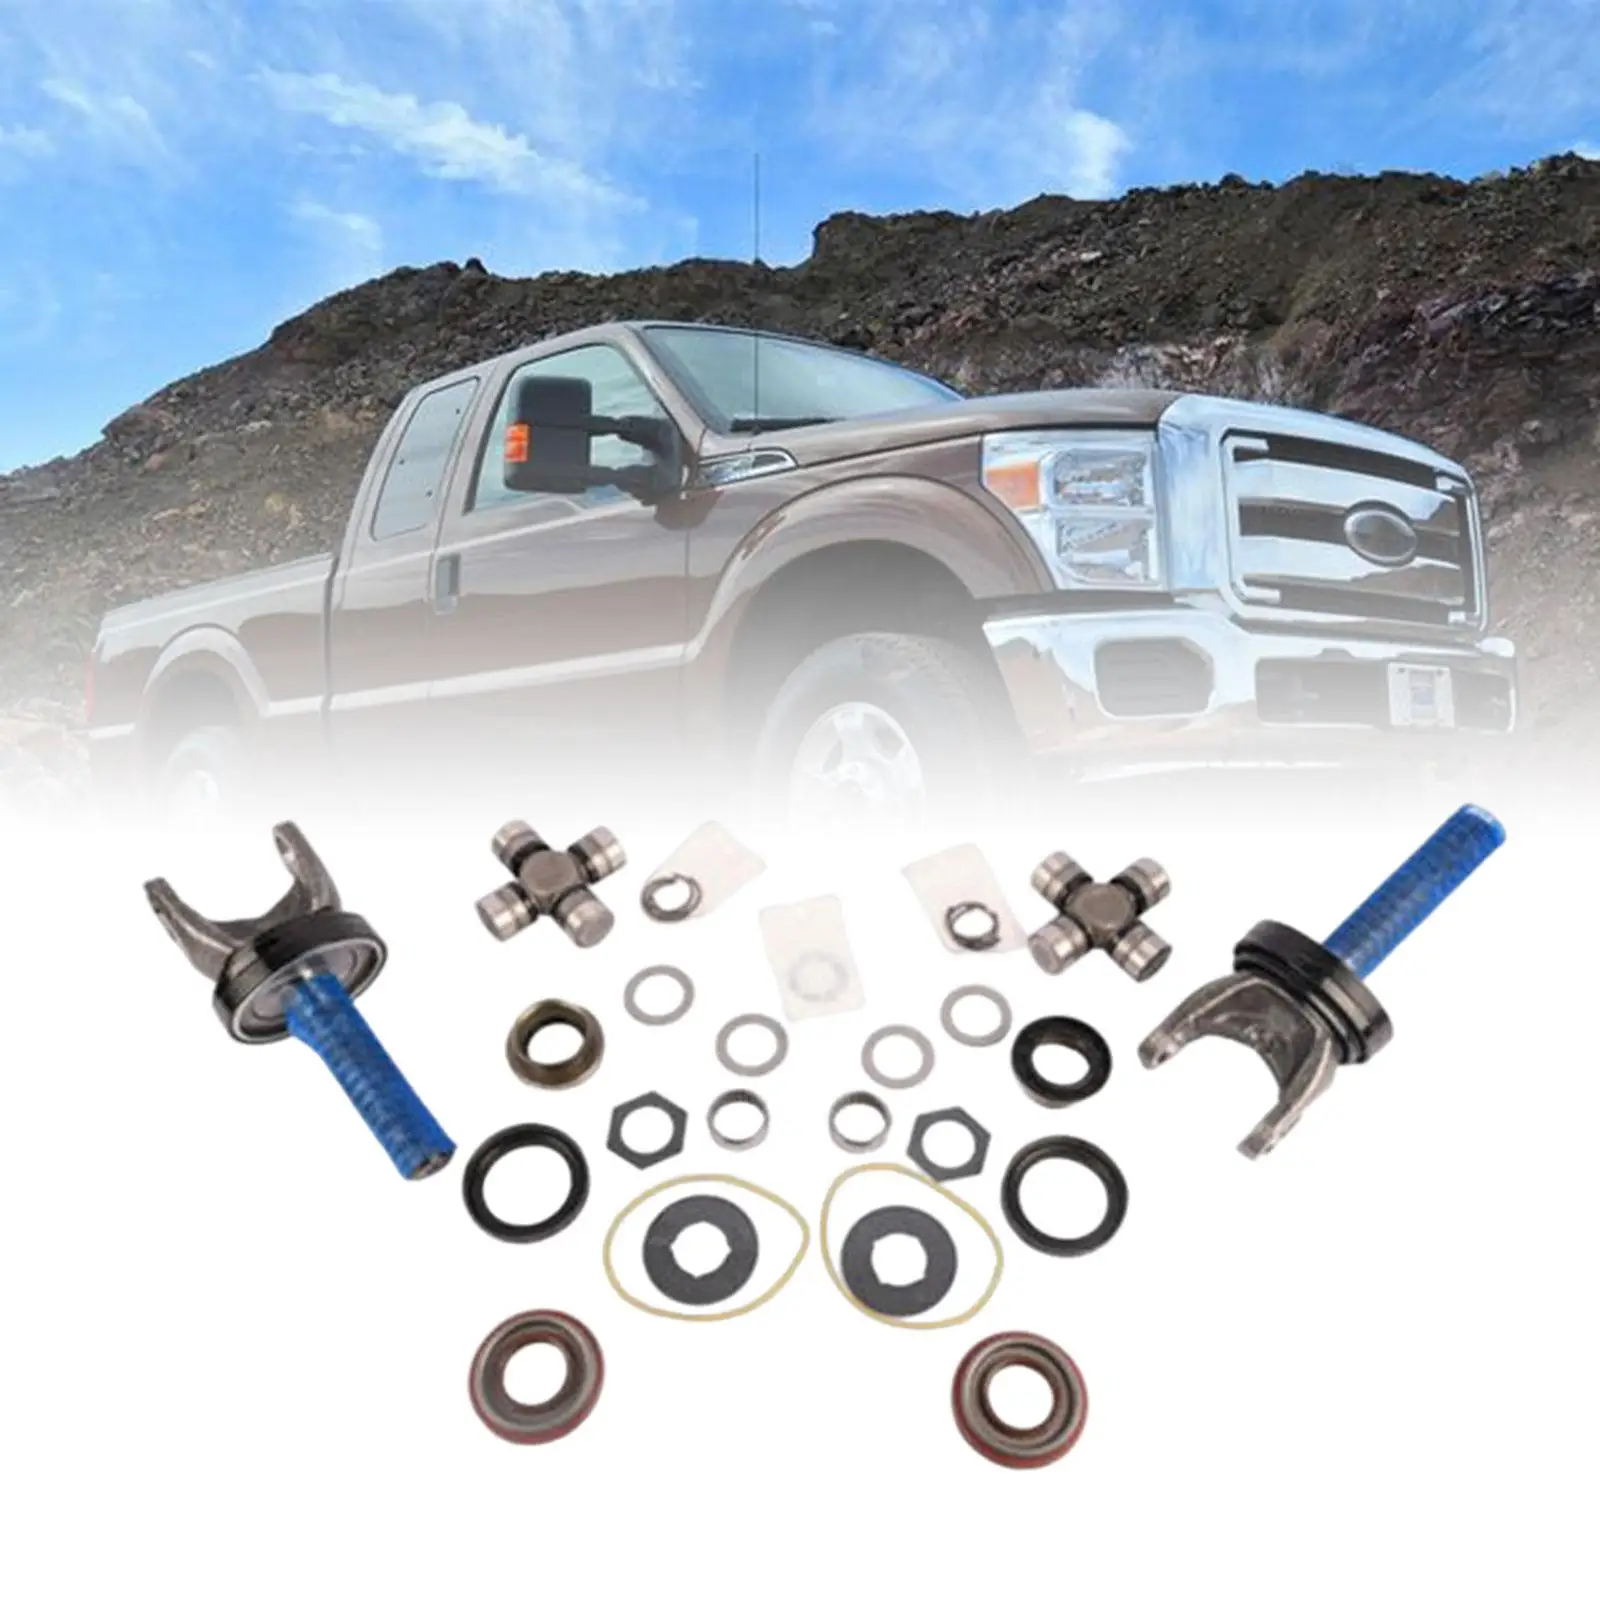 Front Axle Shaft Seal and Bearing Kit 700238-1x 41784-2 50381 for Ford Super Duty F250 F350 1998-2004 Accessory Durable